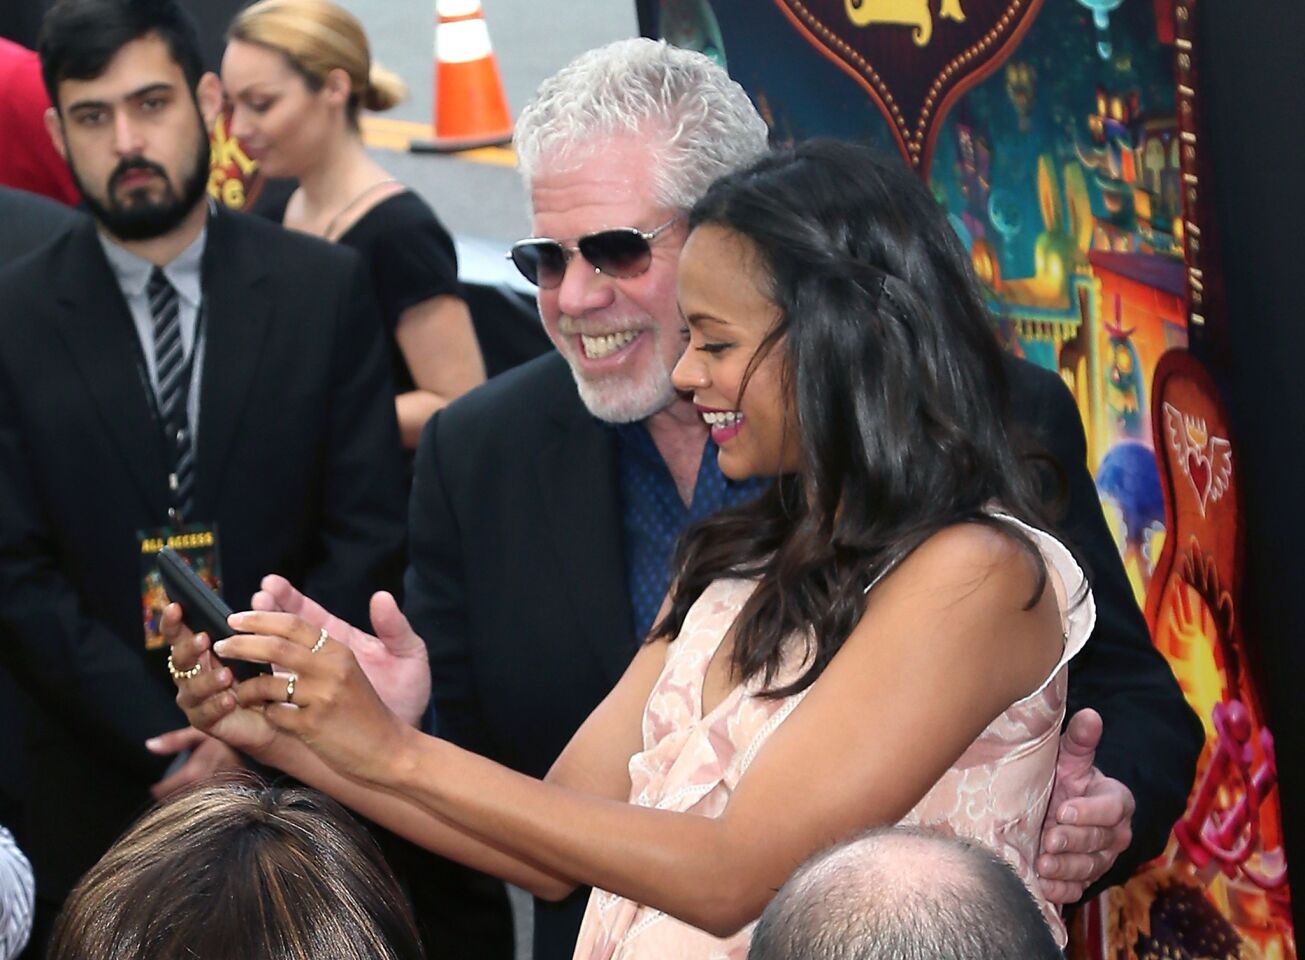 Actors Ron Perlman and Zoe Saldana pose at the premiere of Twentieth Century Fox and Reel FX Animation Studios' "The Book of Life" at Regal Cinemas L.A. Live on Oct. 12, 2014, in Los Angeles.